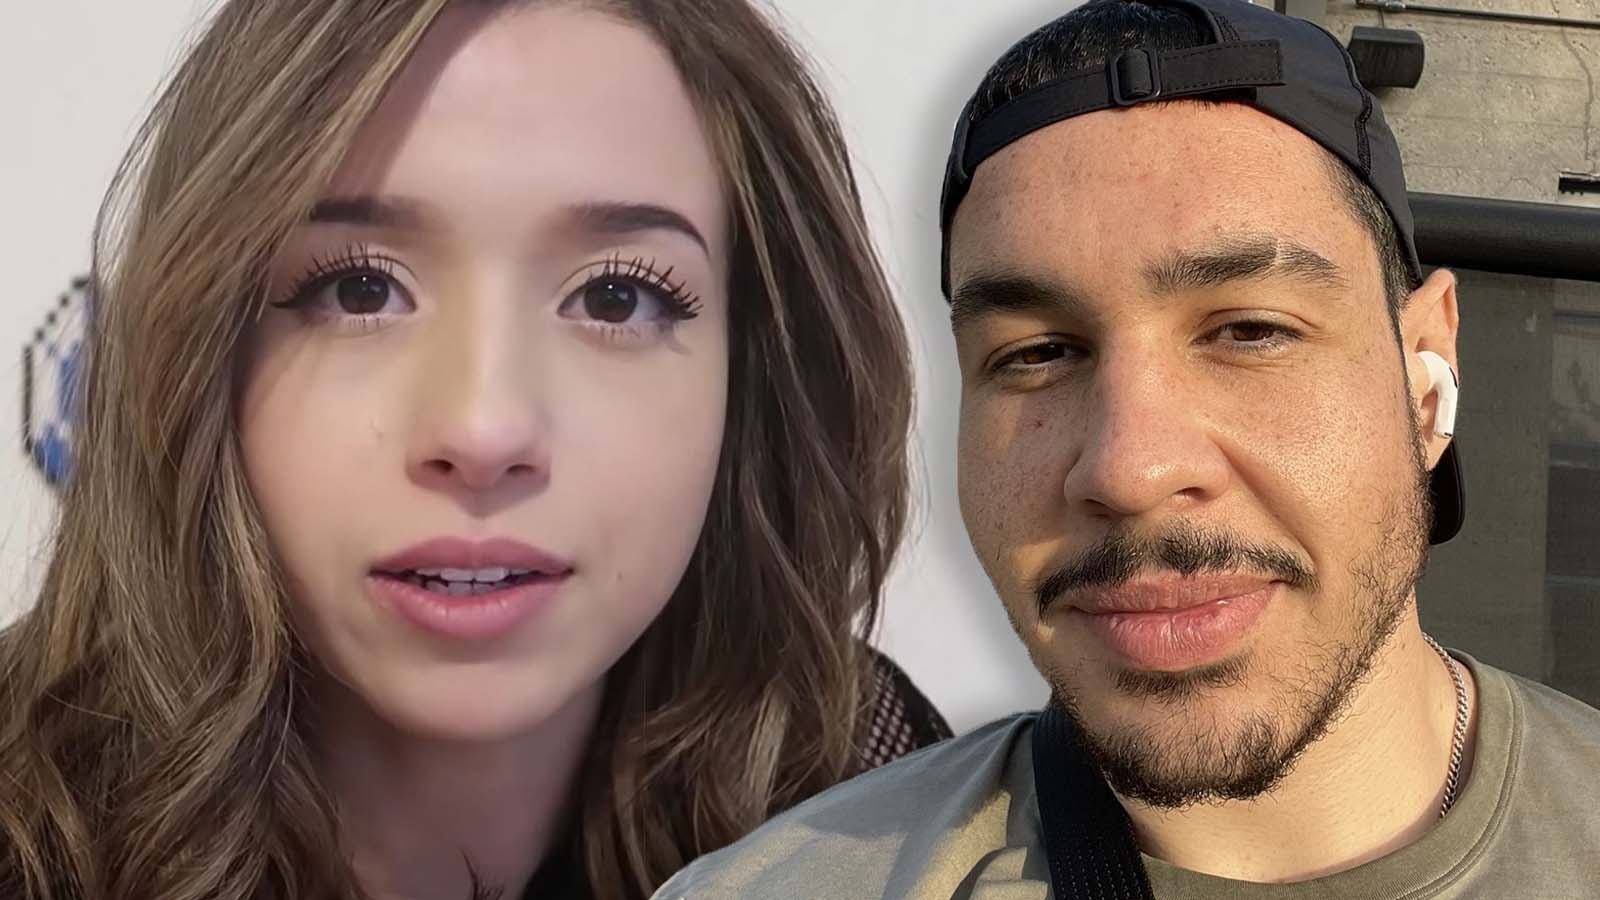 Pokimane reveals friendship with GreekGodx is over: “It is what it is”